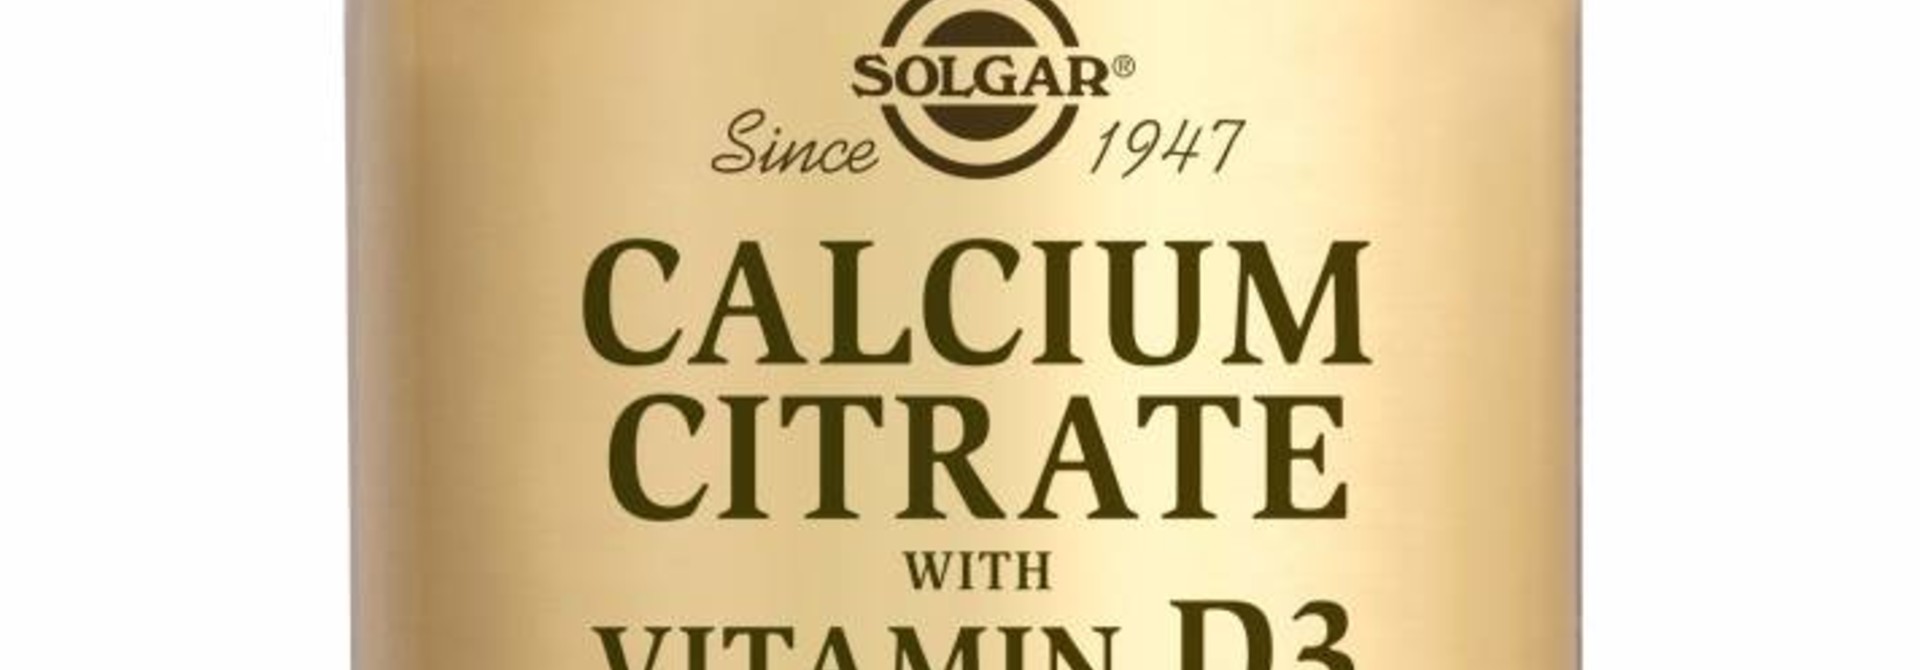 Calcium Citrate with Vitamin D-3 240 tabletten